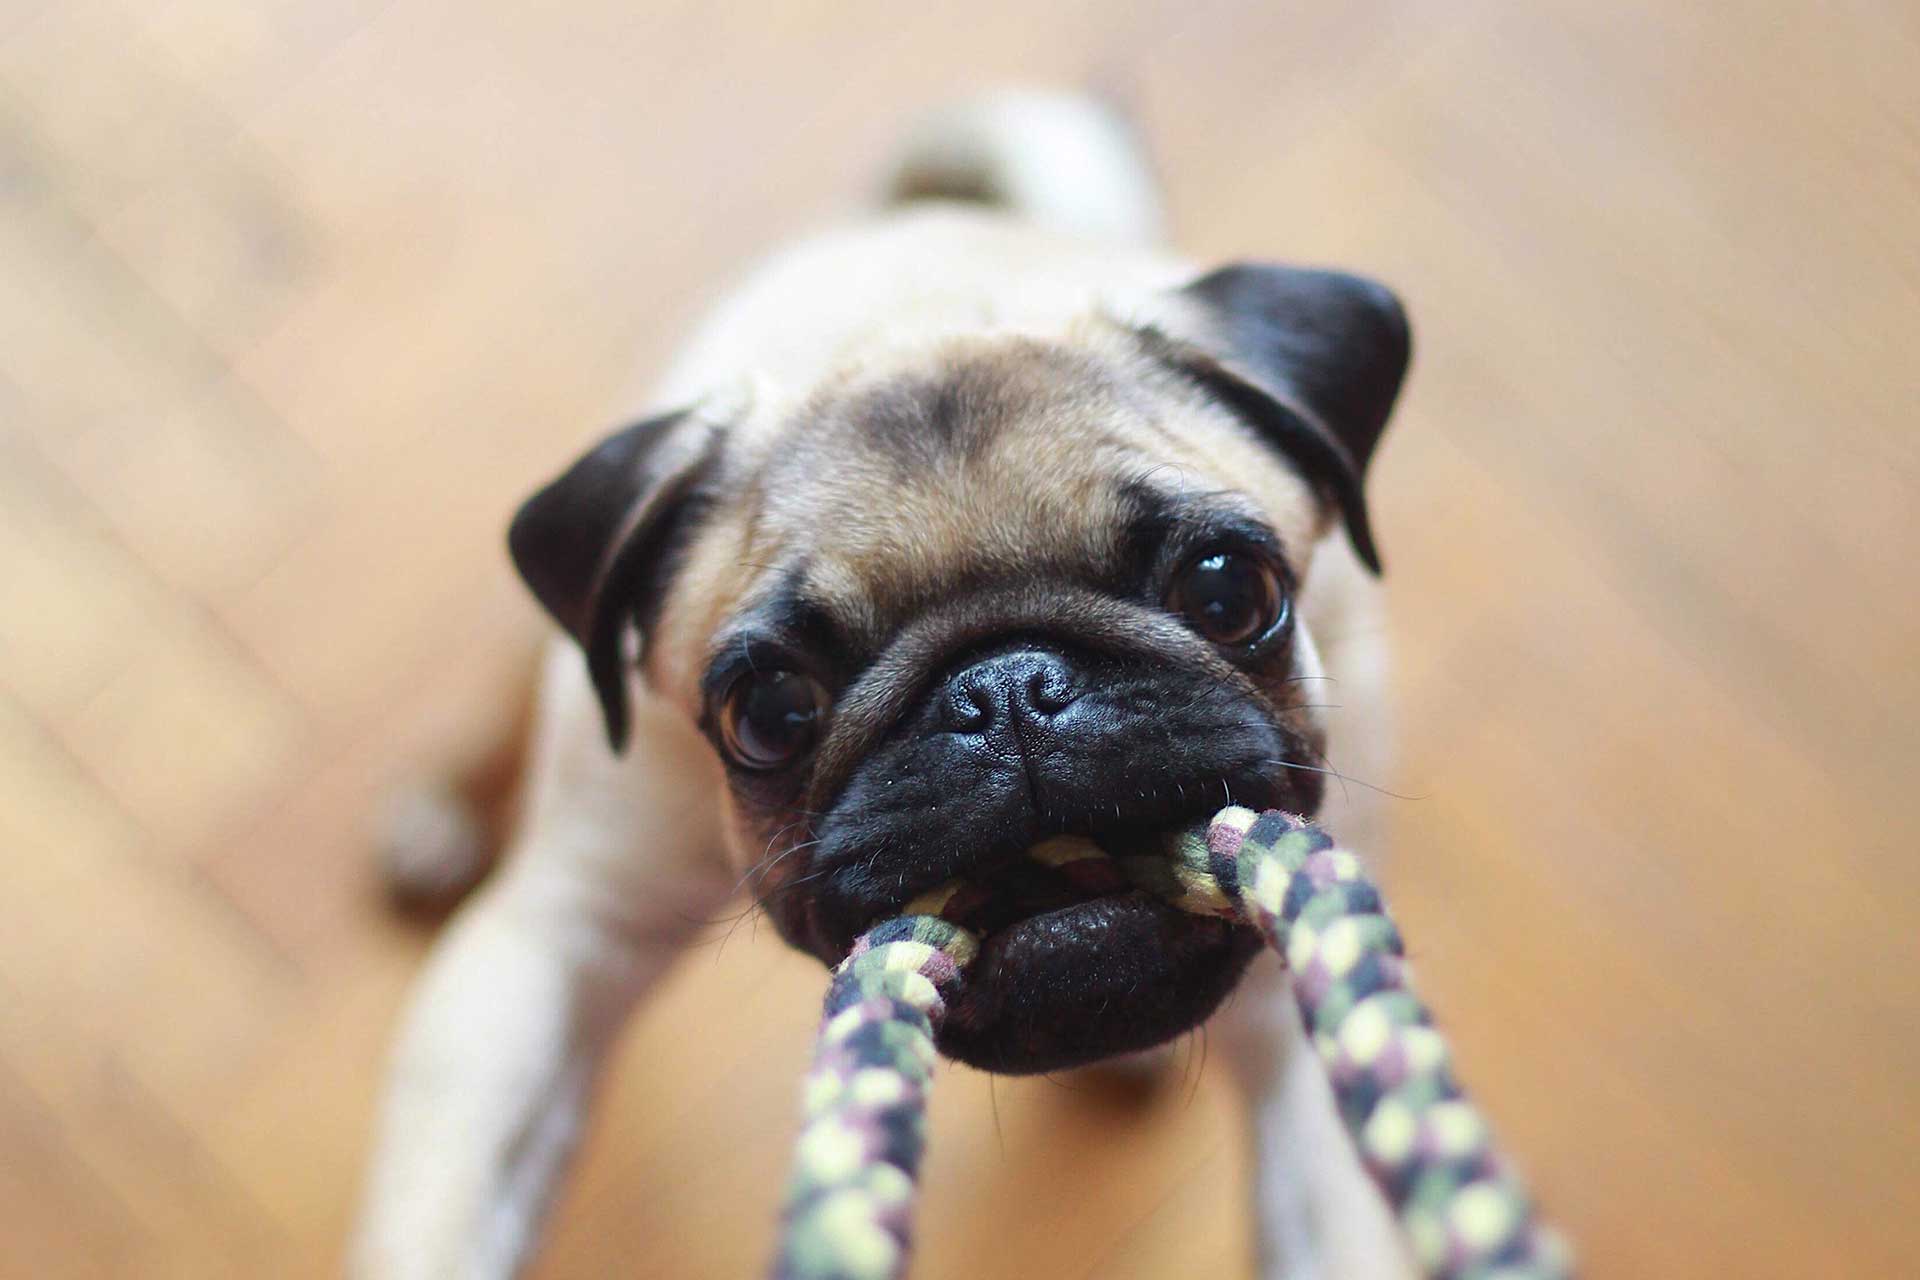 A dog pulling a rope